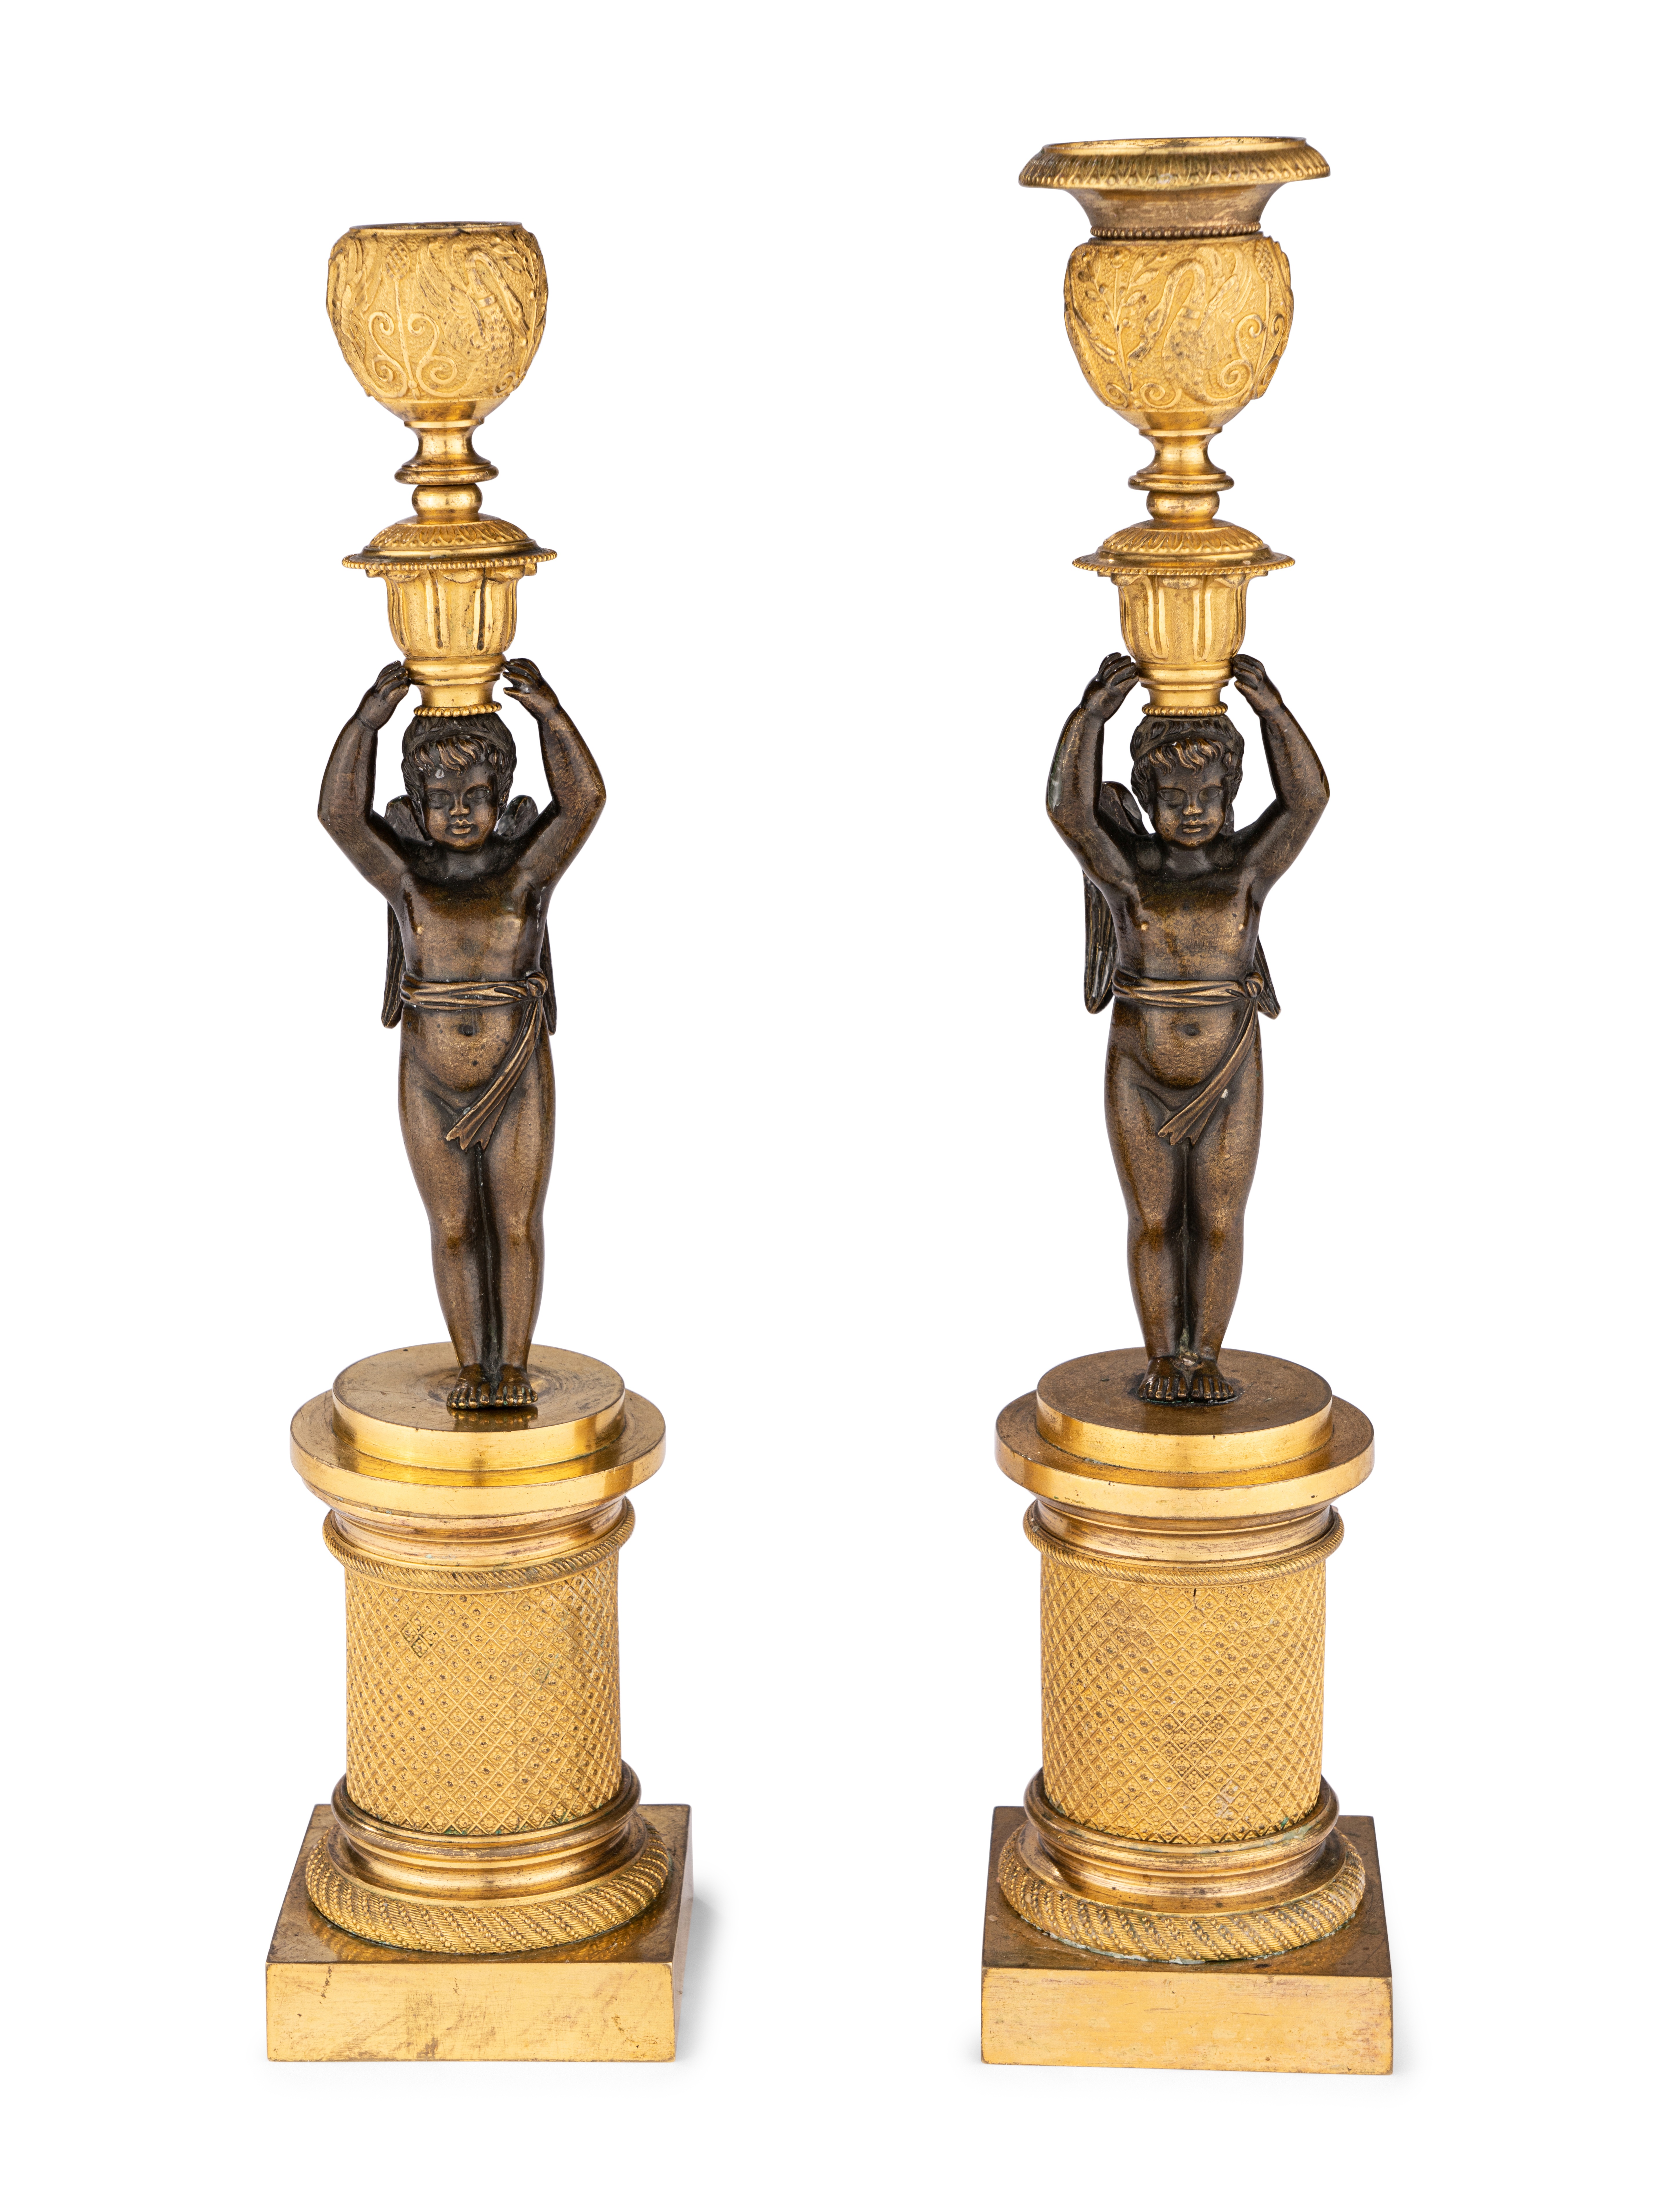 A Pair of Restauration Ormolu and Patinated Bronze Figural Candlesticks